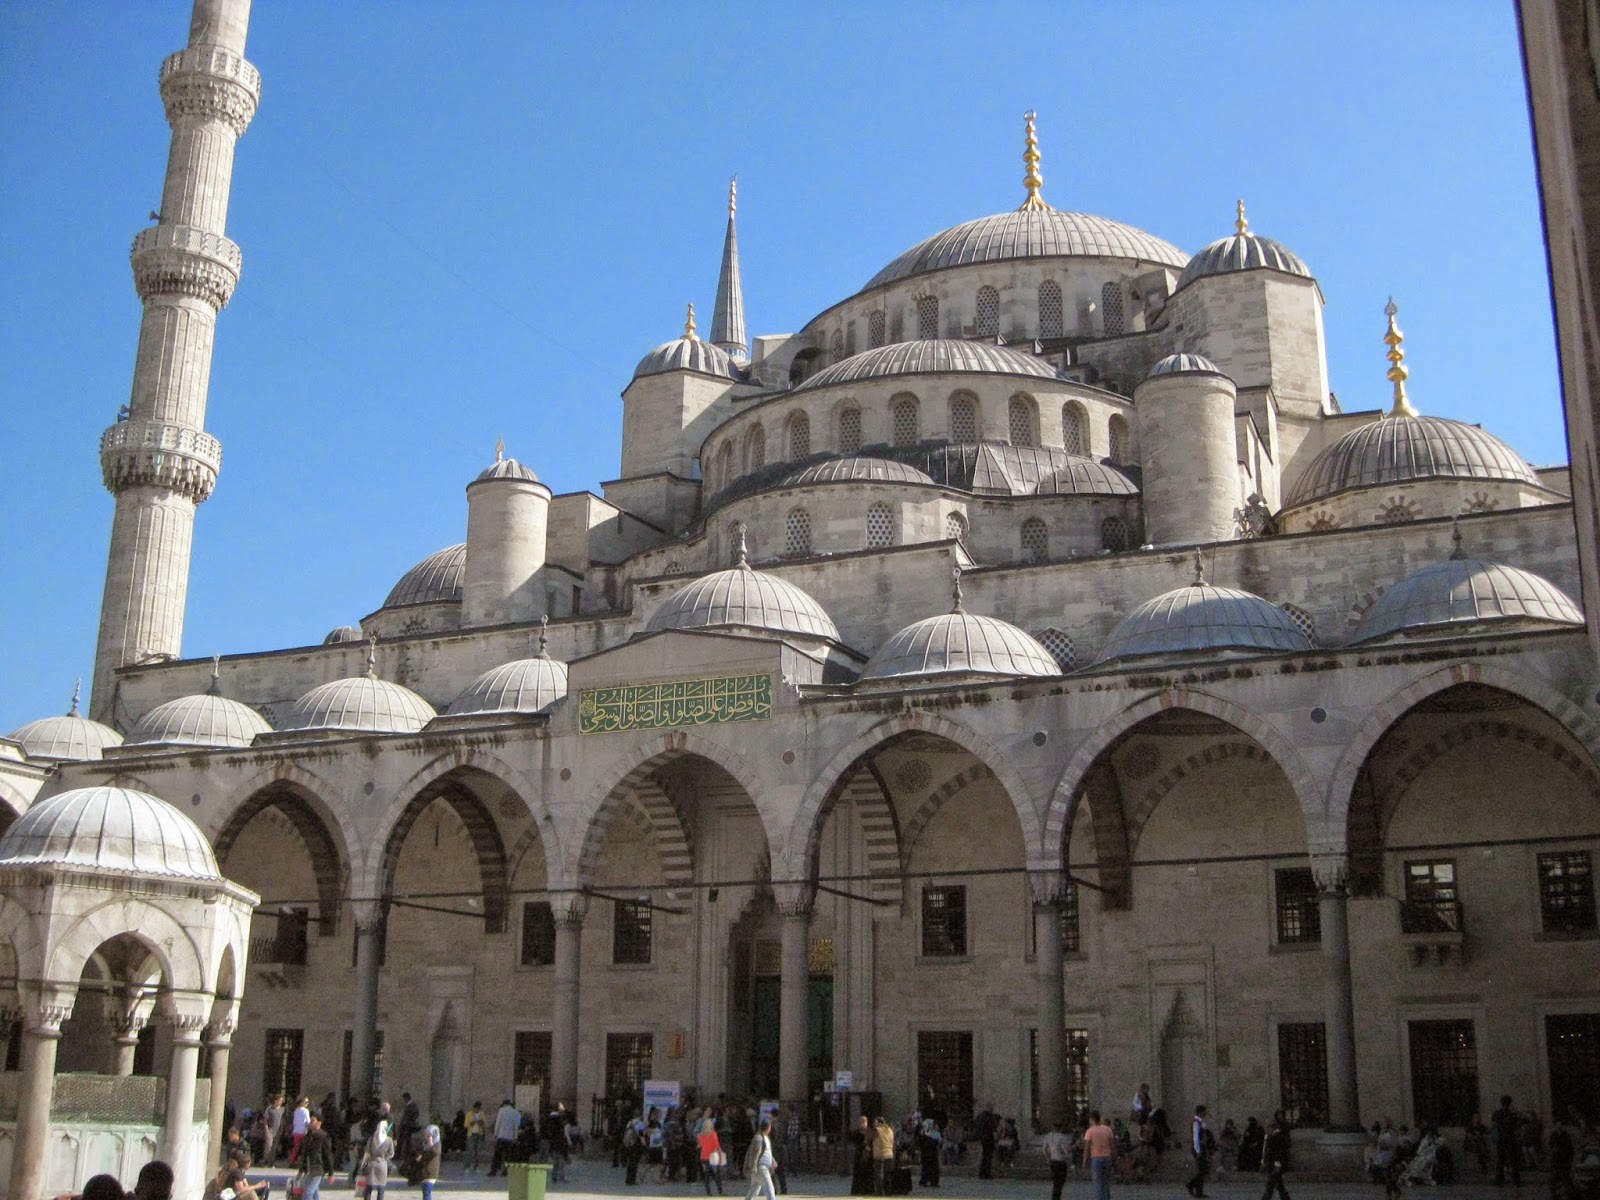 Istanbul - Visitors can only enter the Blue Mosque after prayer is finished